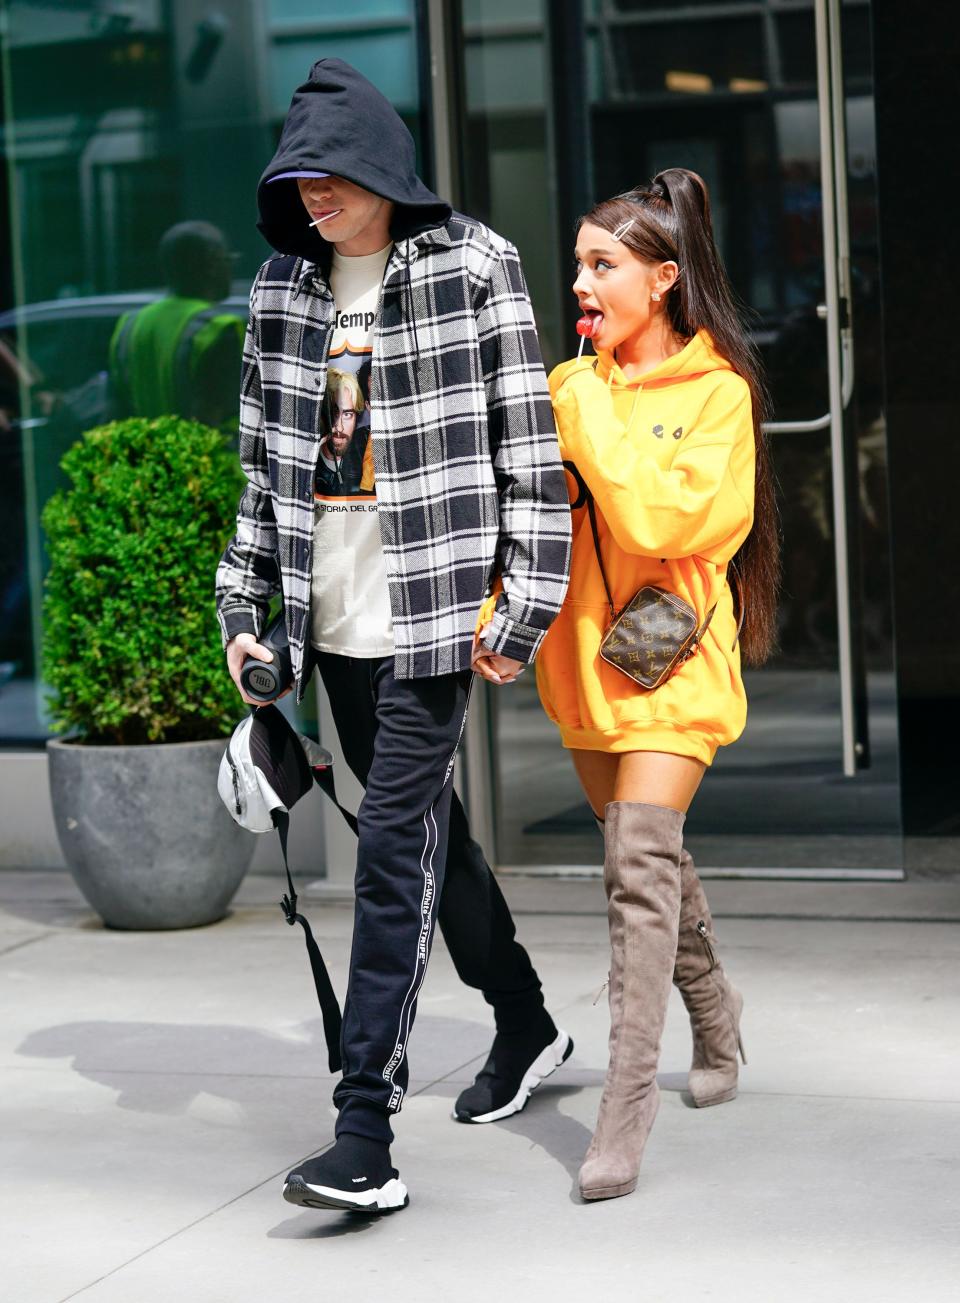 Pete Davidson and Ariana Grande in the street